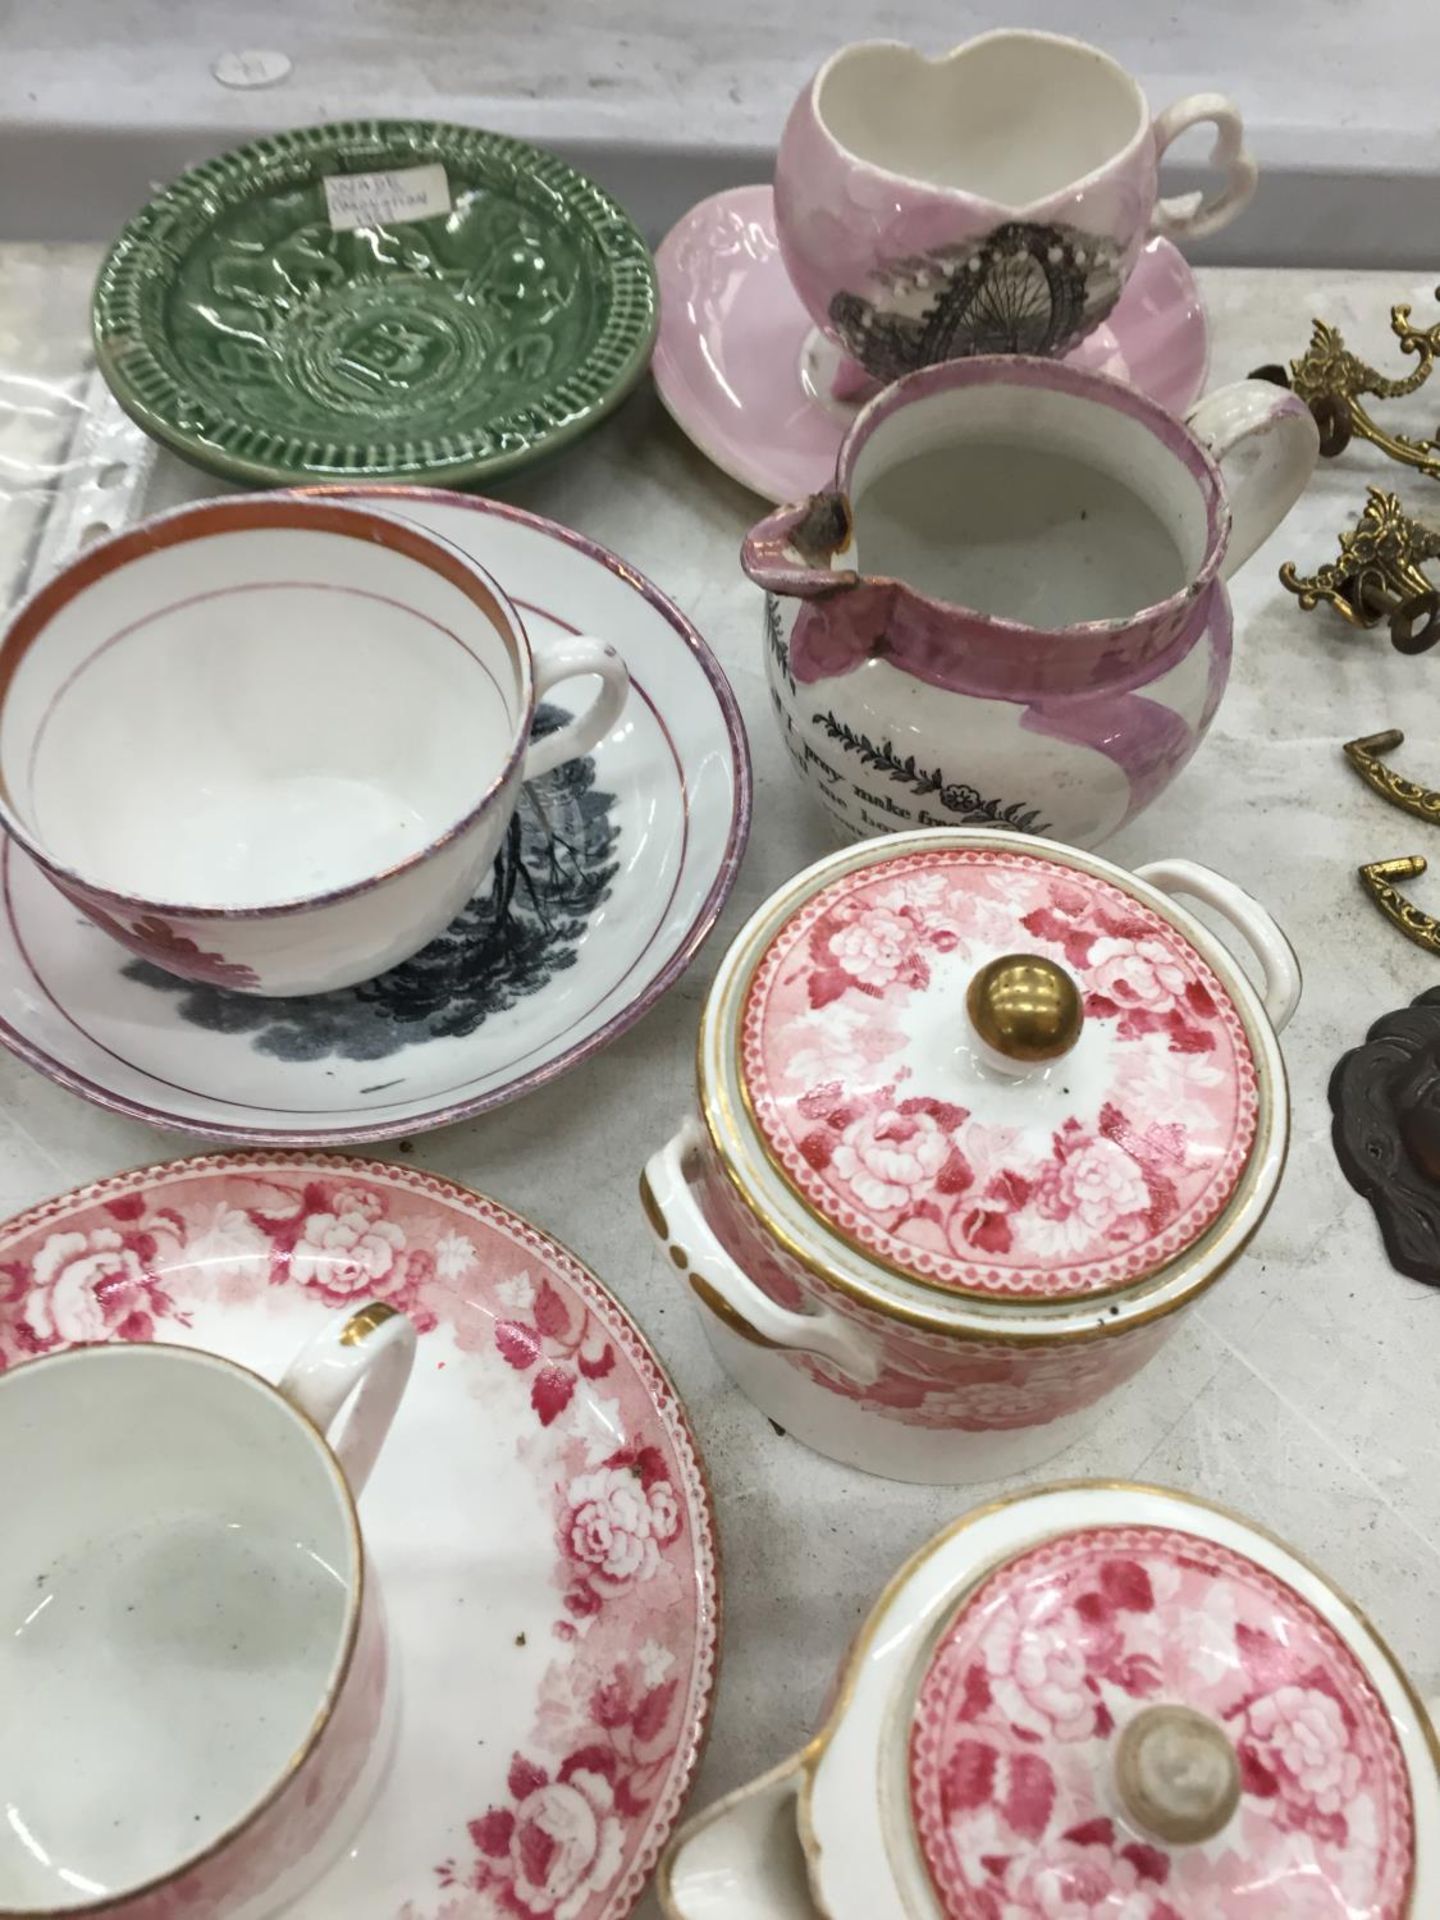 A QUANTITY OF ANTIQUE AND VINTAGE CHINA CUPS AND SAUCERS TO INCLUDE WEDGWOOD JUGS, SUGAR BOWL, CUP - Image 4 of 4